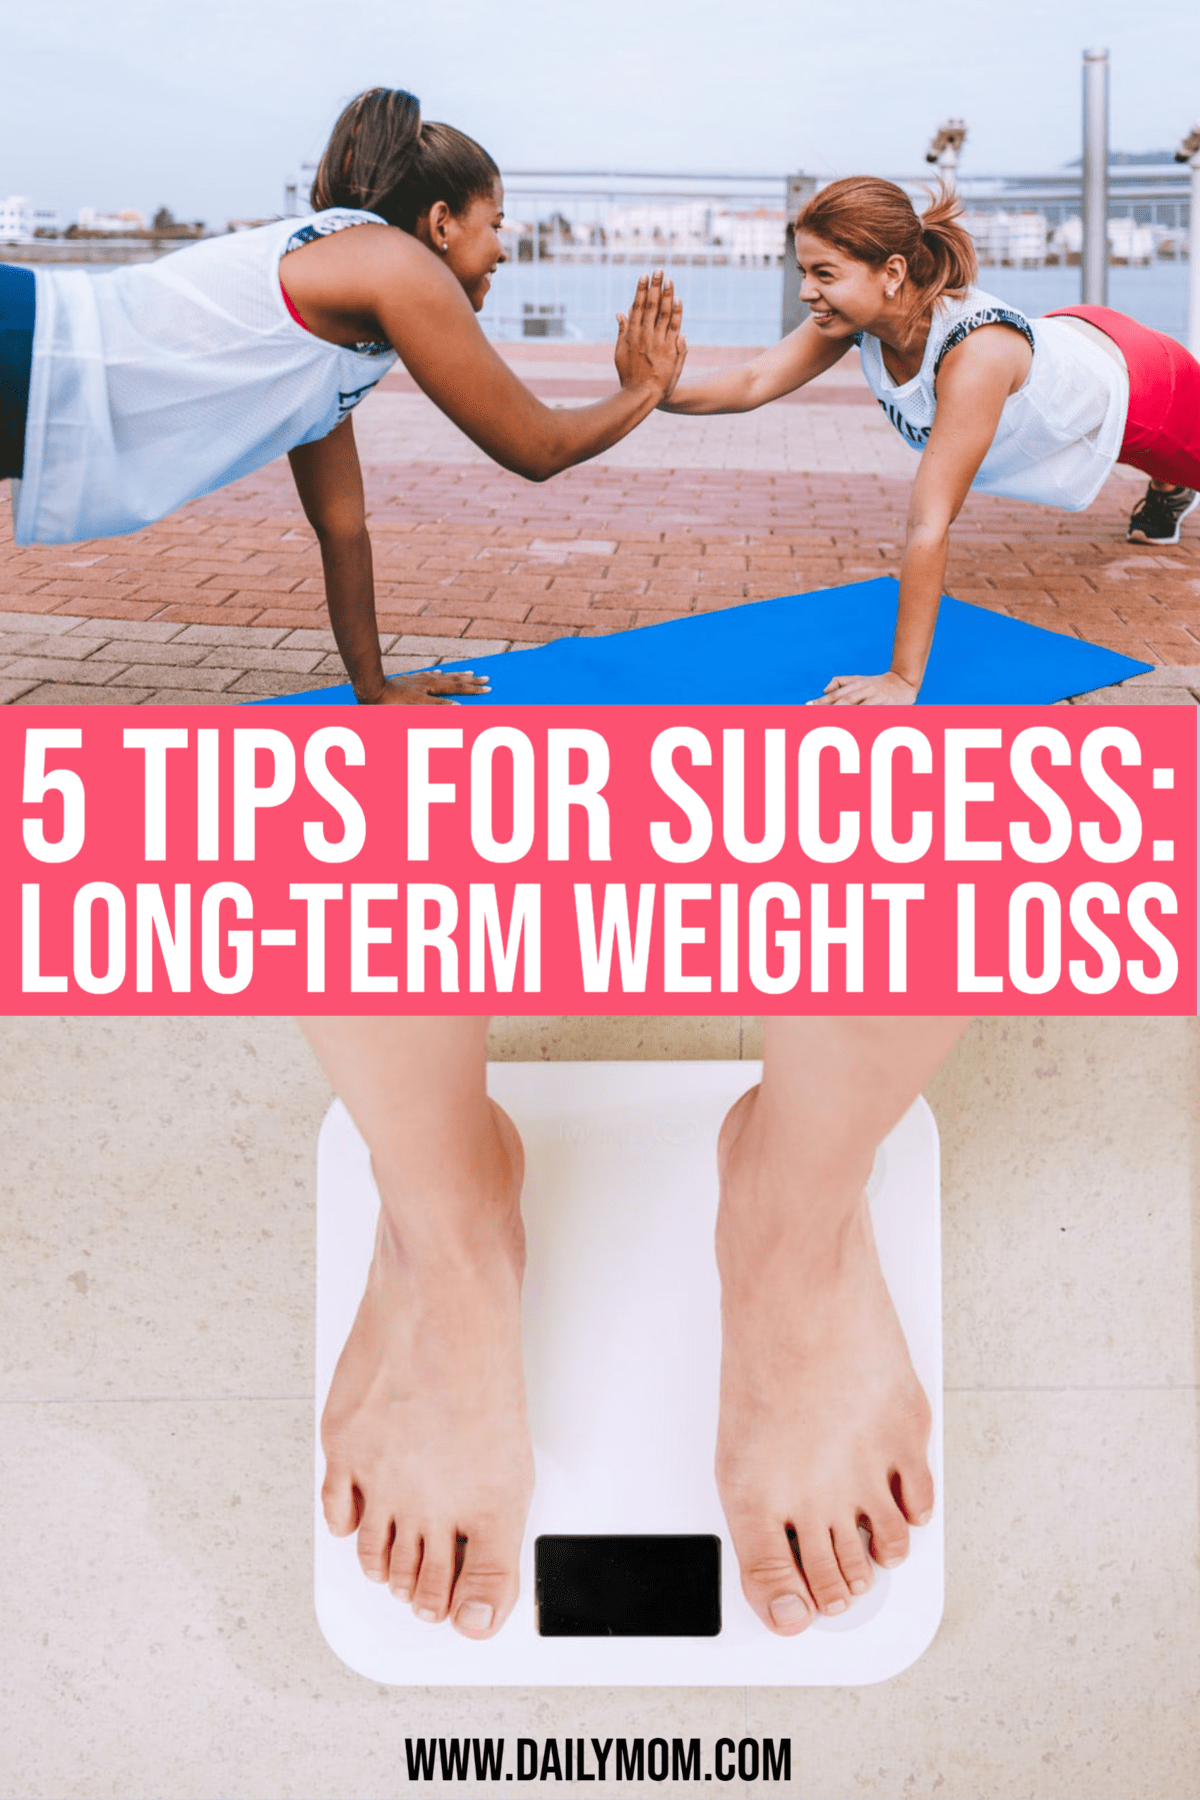 Five Tips For Lasting Weight Loss